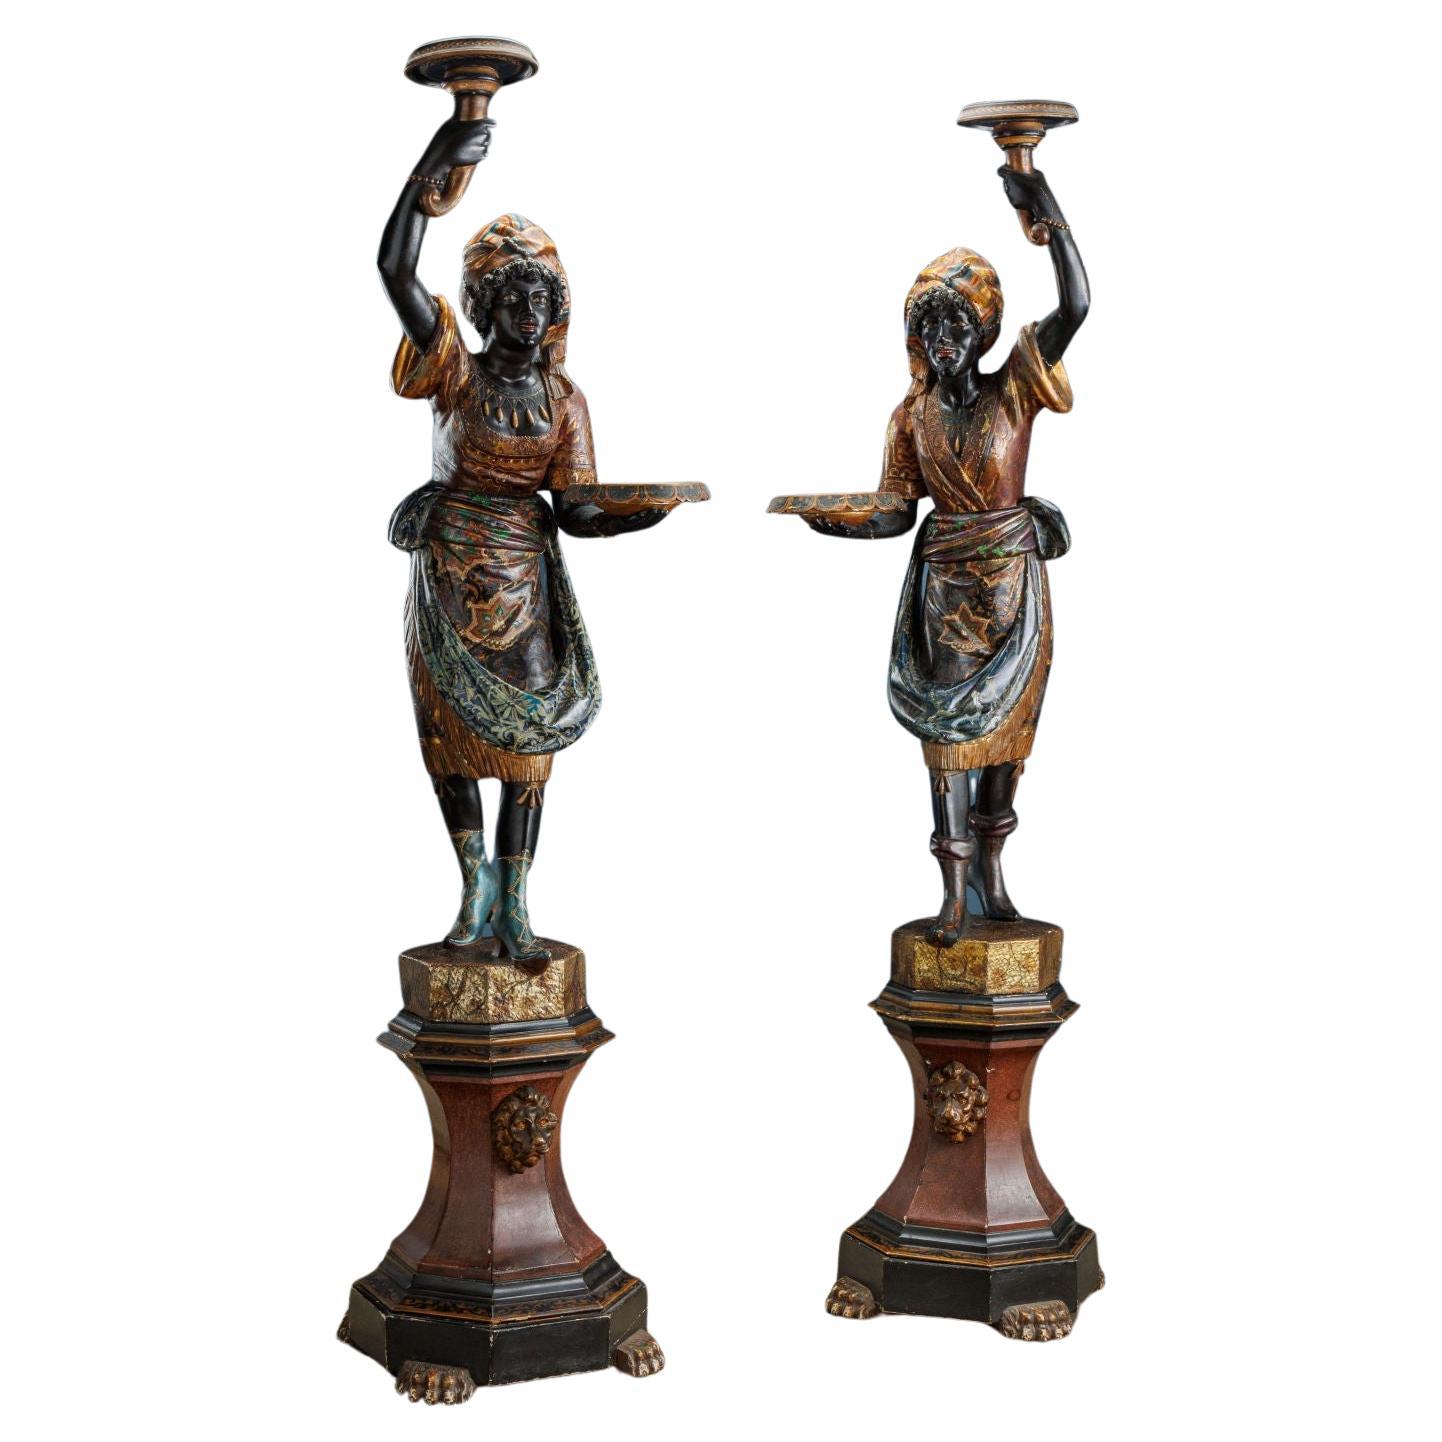 Pair of Moors. Venice, Second half of the 19th century